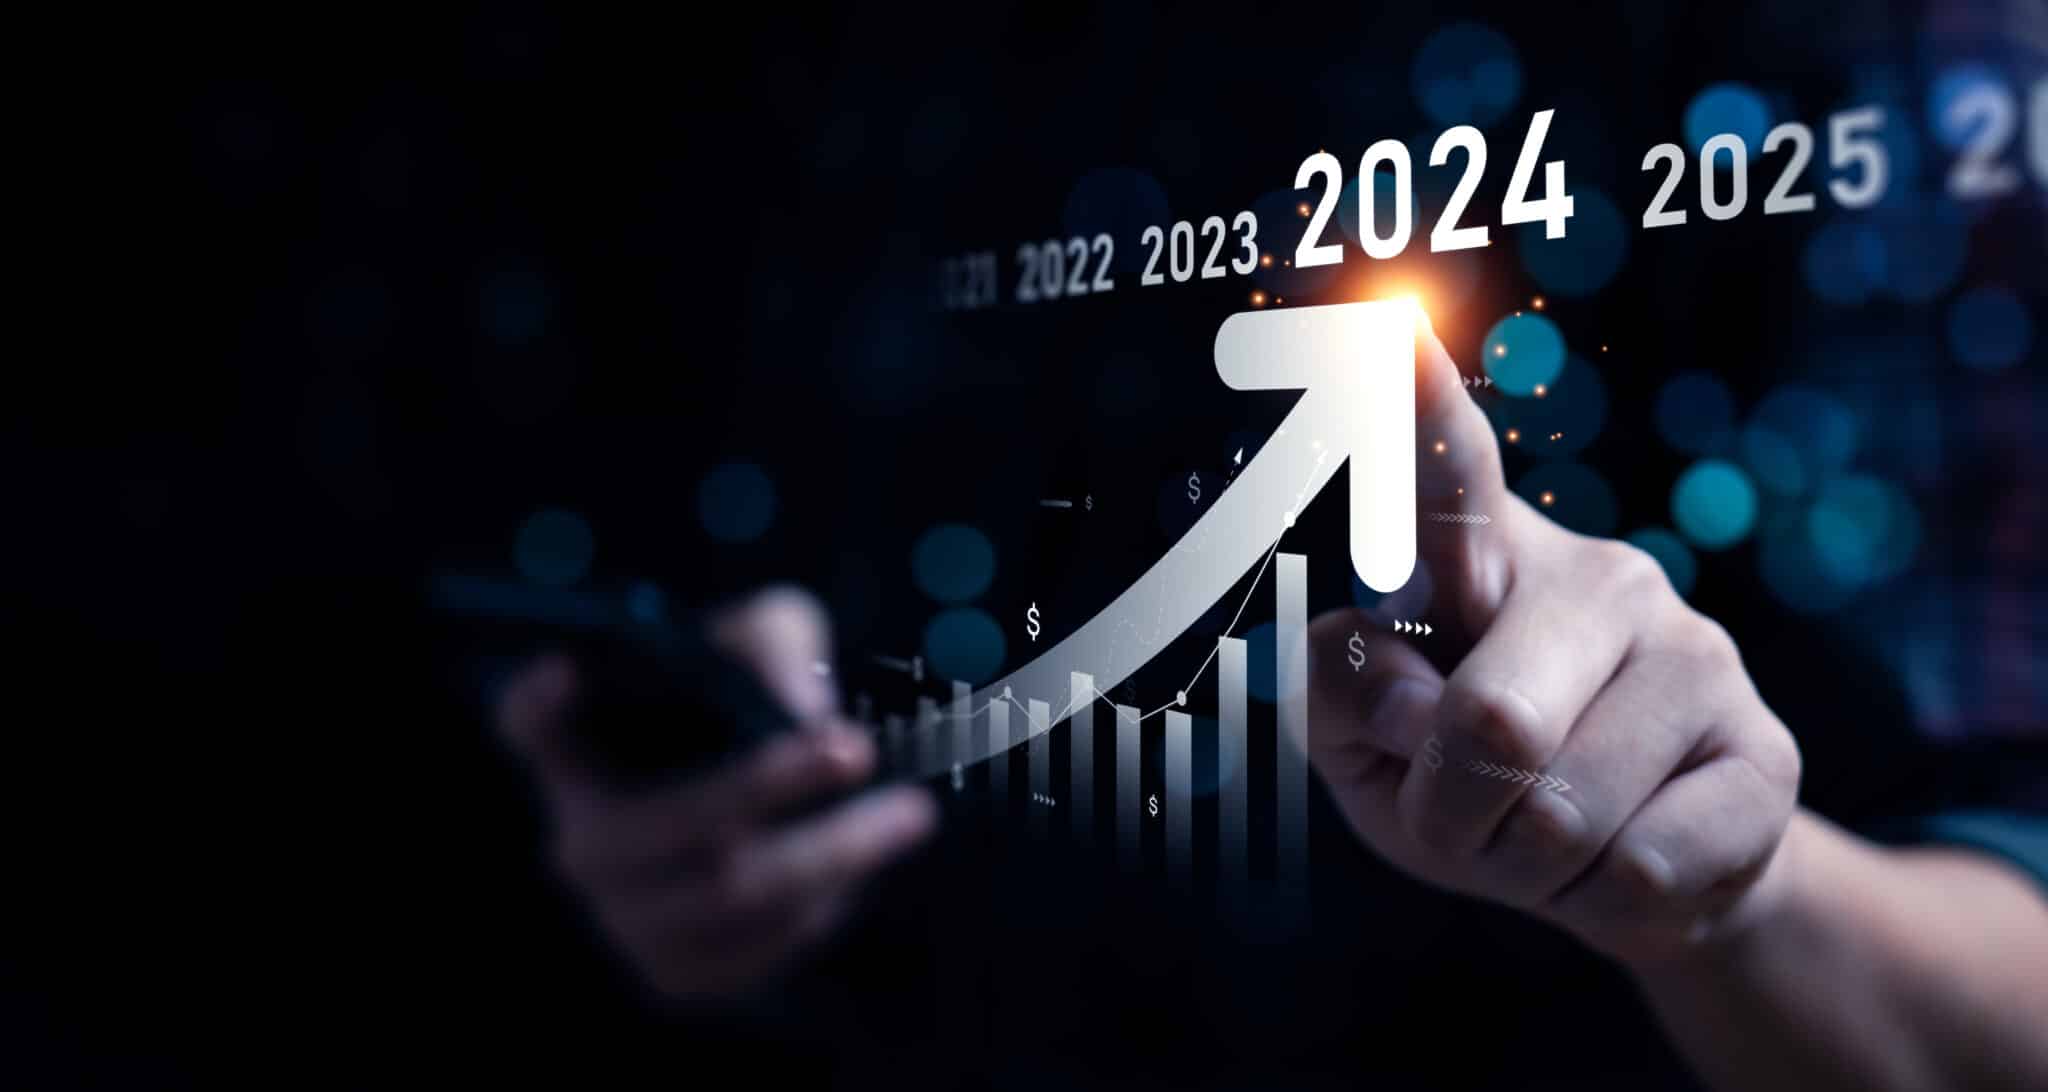 2023 Digital Marketing Trends that are Likely to Stay Trending in 2024